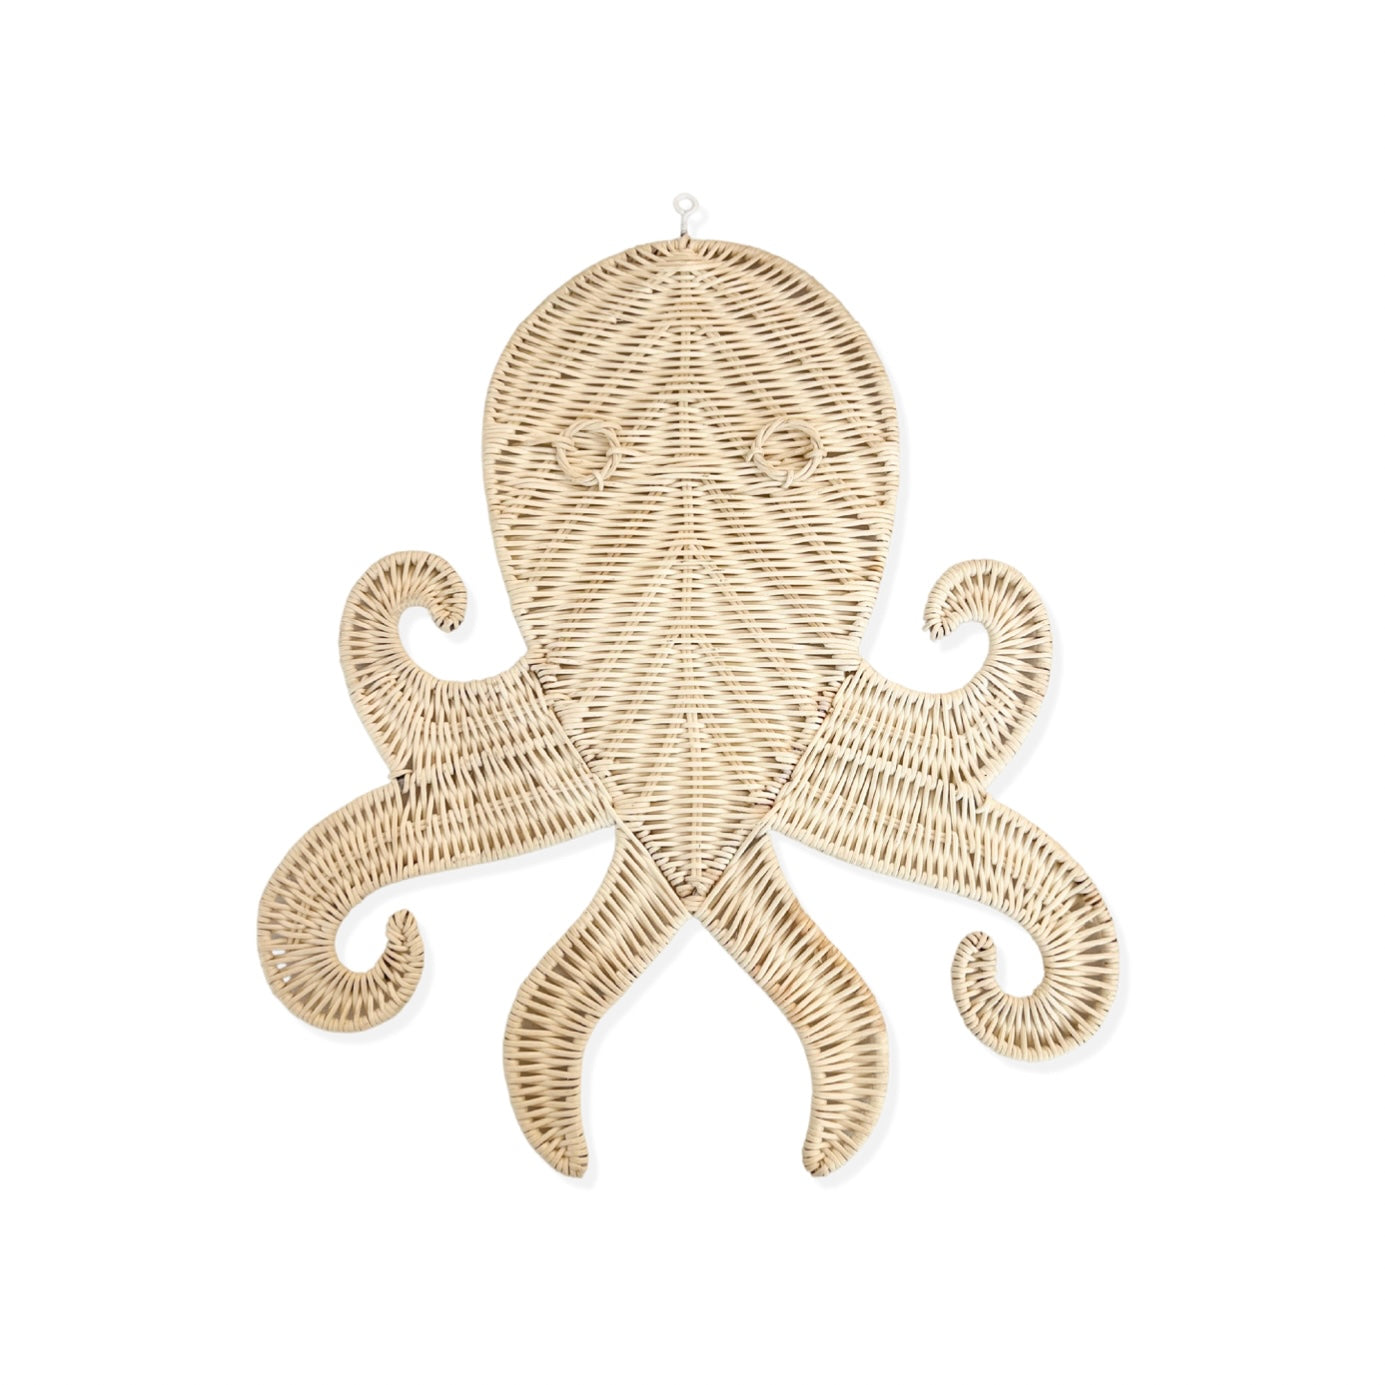 Olly Octopus - Large - Rattan Wall Decor